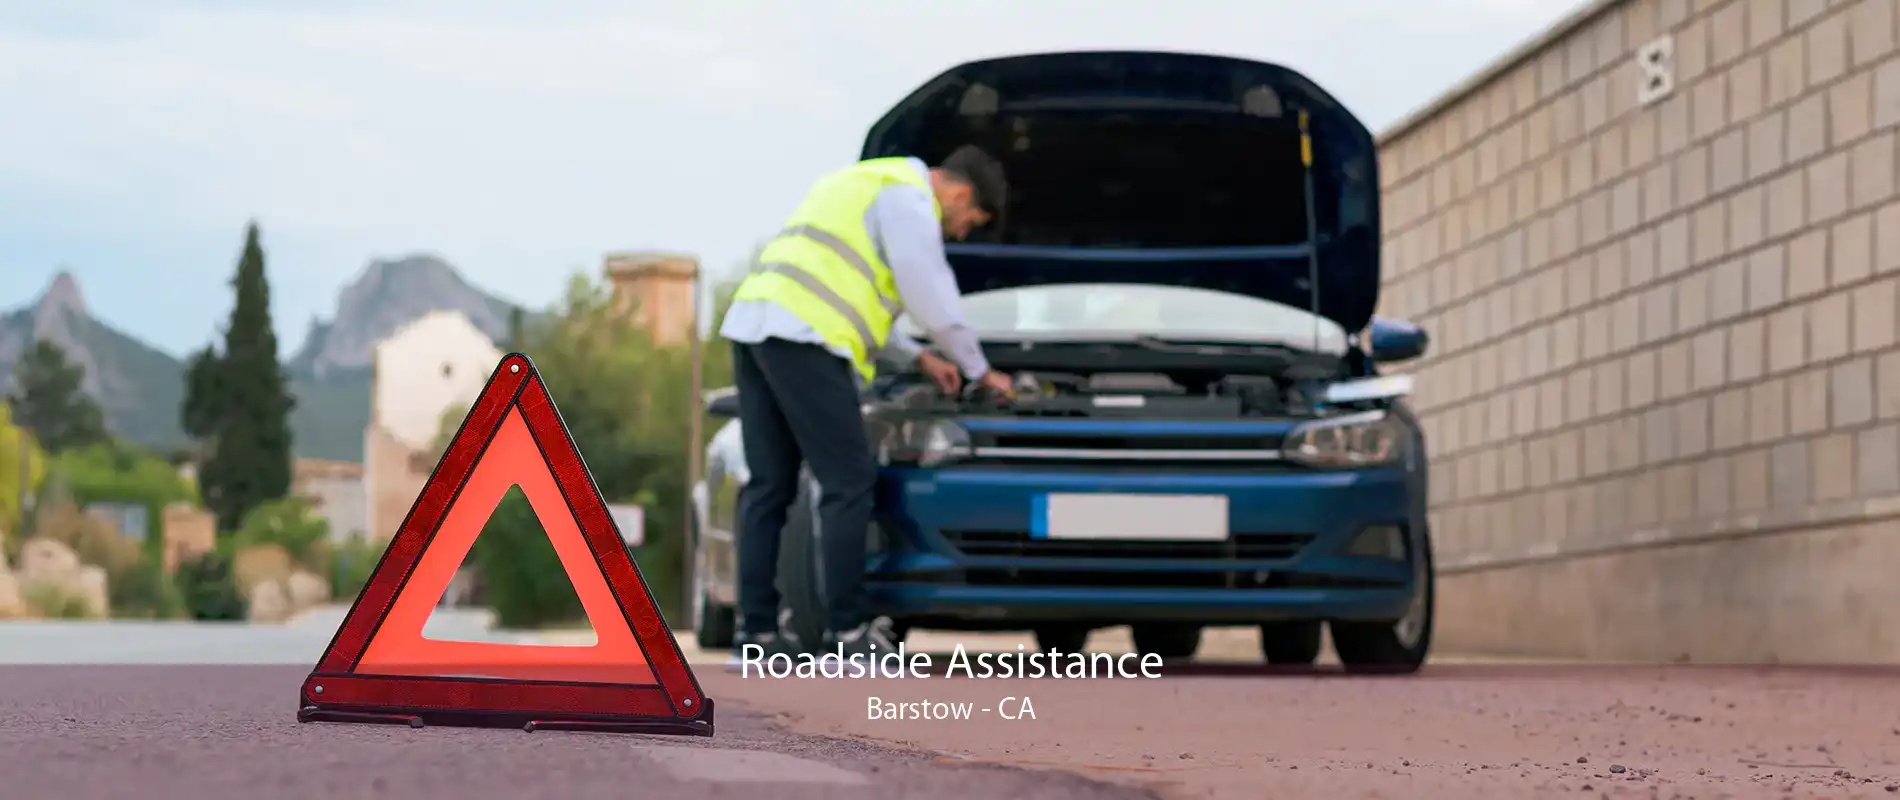 Roadside Assistance Barstow - CA